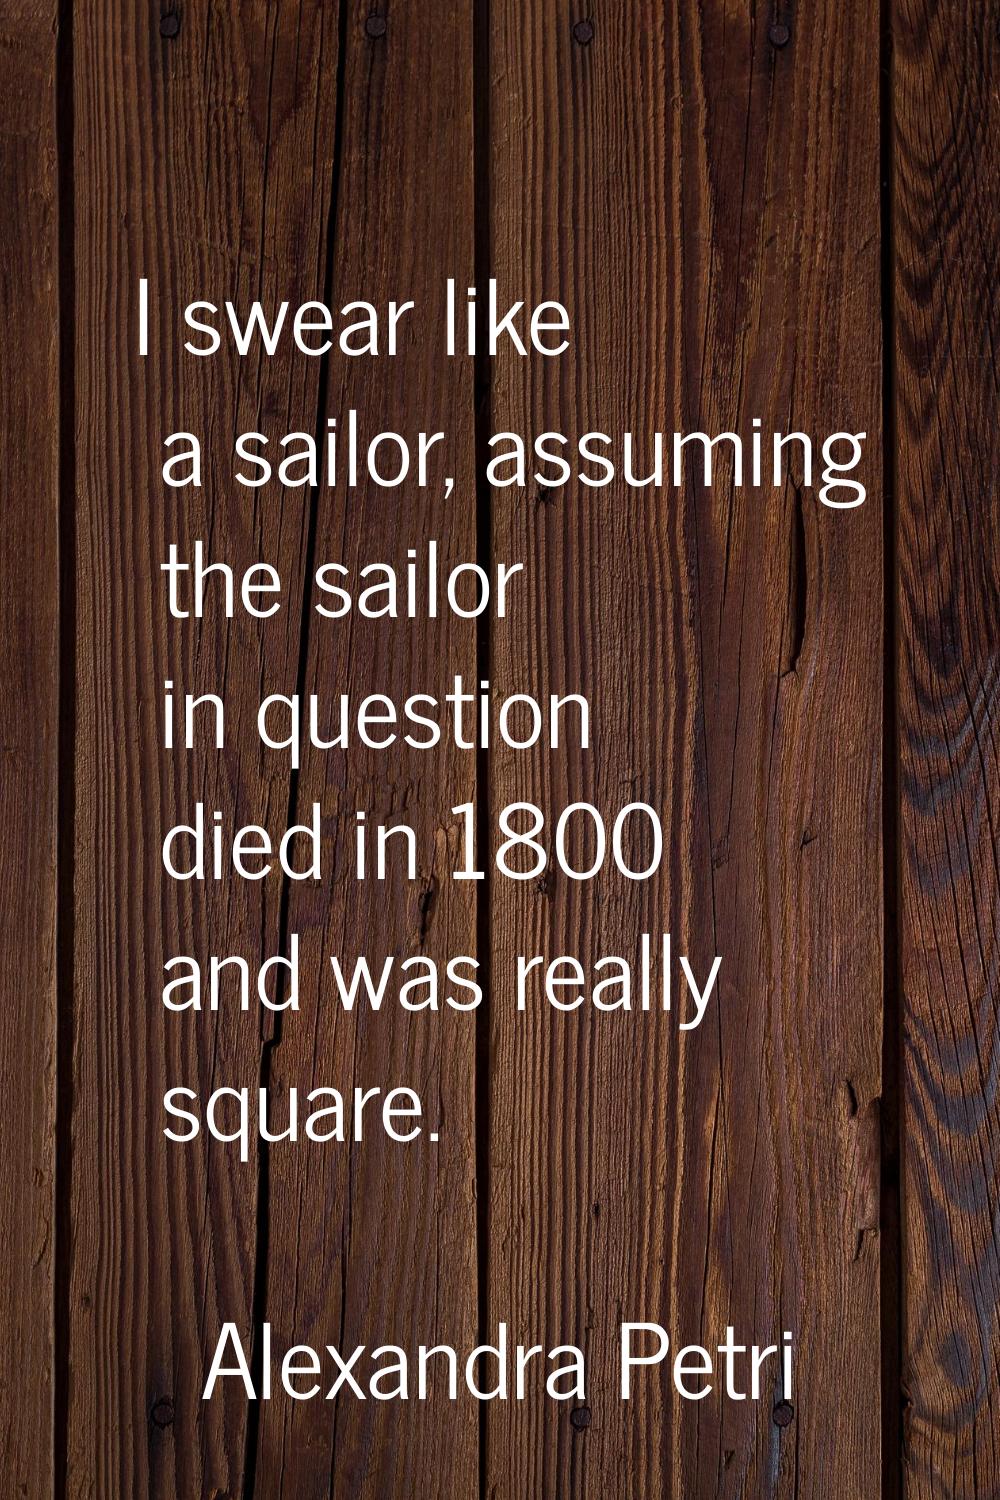 I swear like a sailor, assuming the sailor in question died in 1800 and was really square.